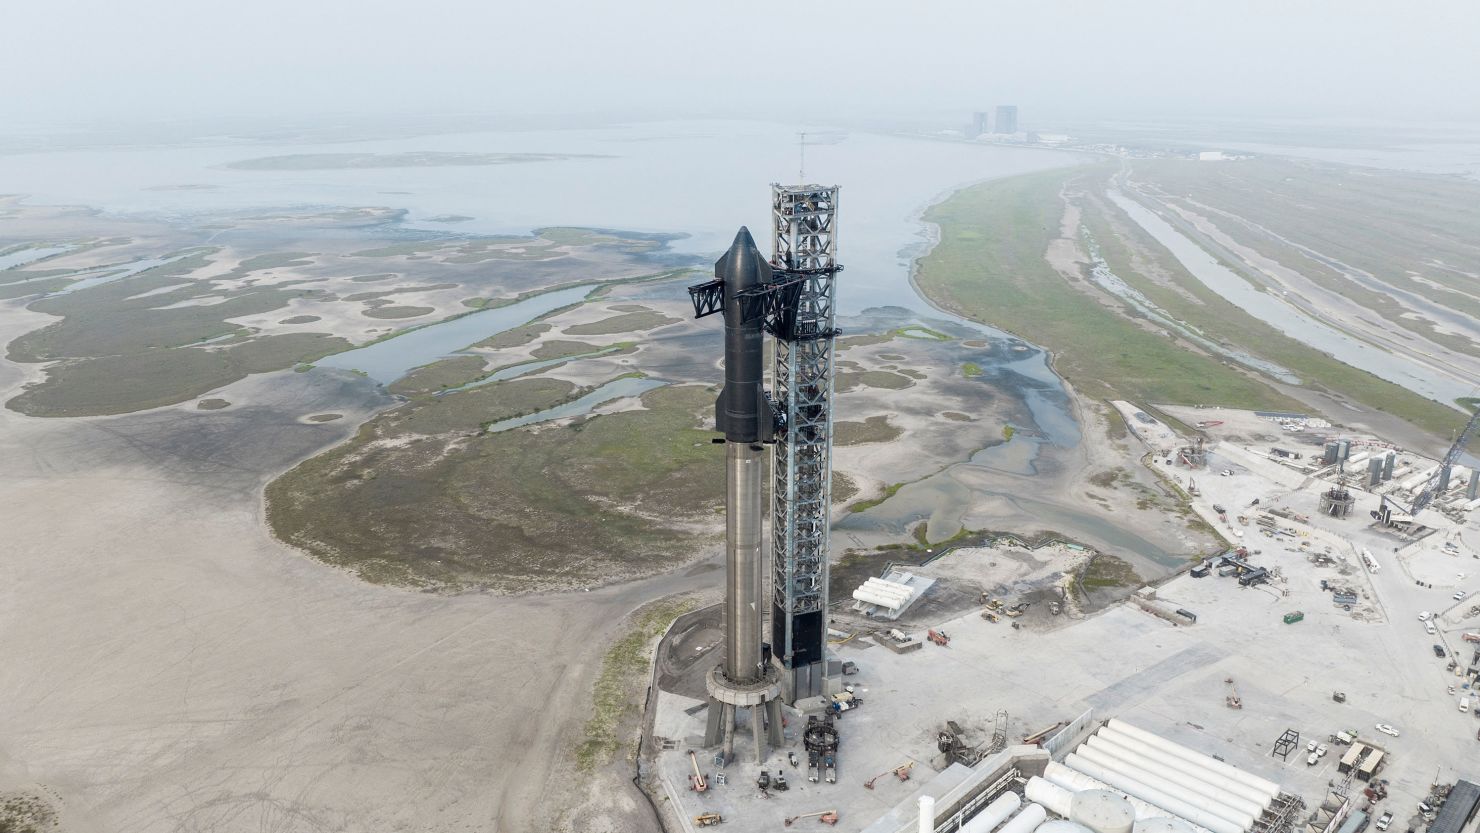 SpaceX's Starship is seen on its launchpad near Brownsville, Texas.